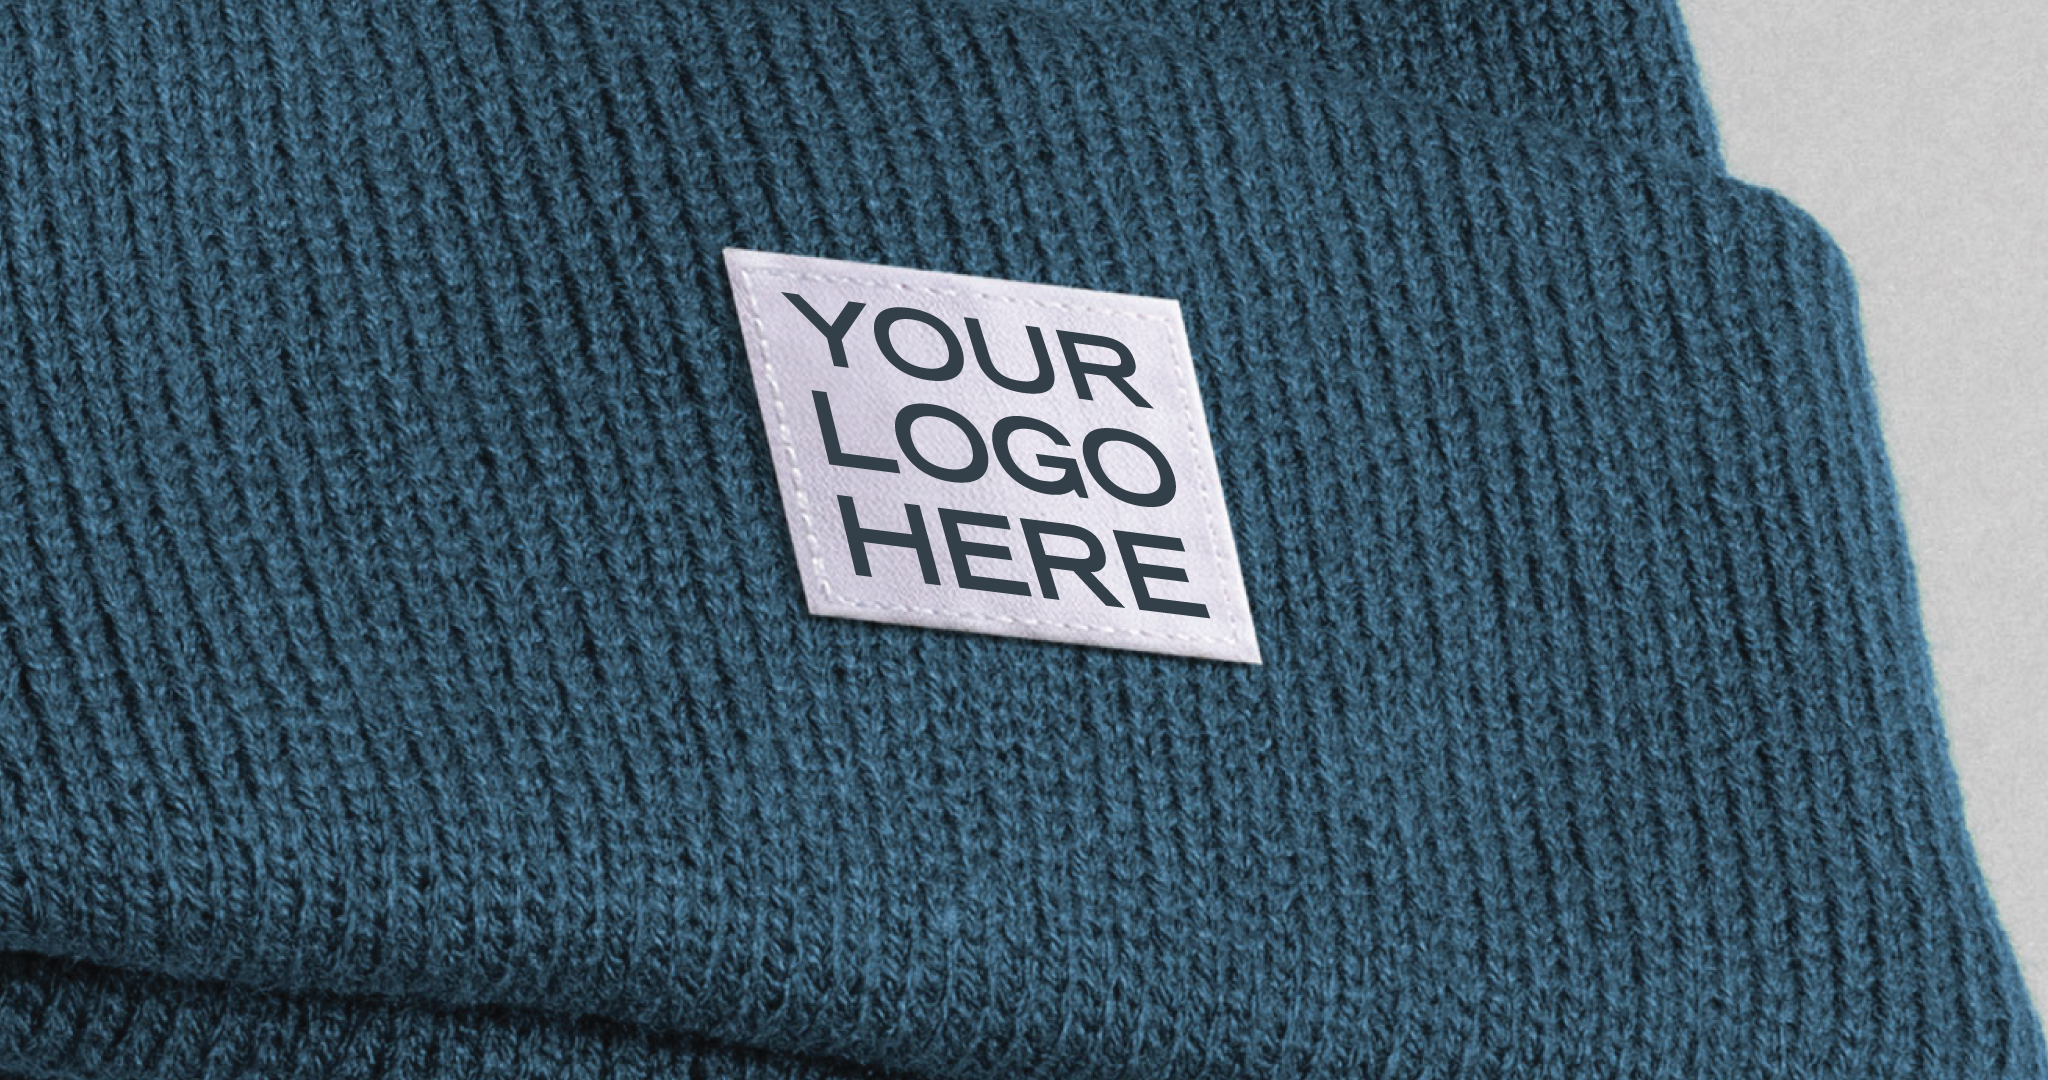 COAL_YOUR_LOGO_HERE_BEANIE.png